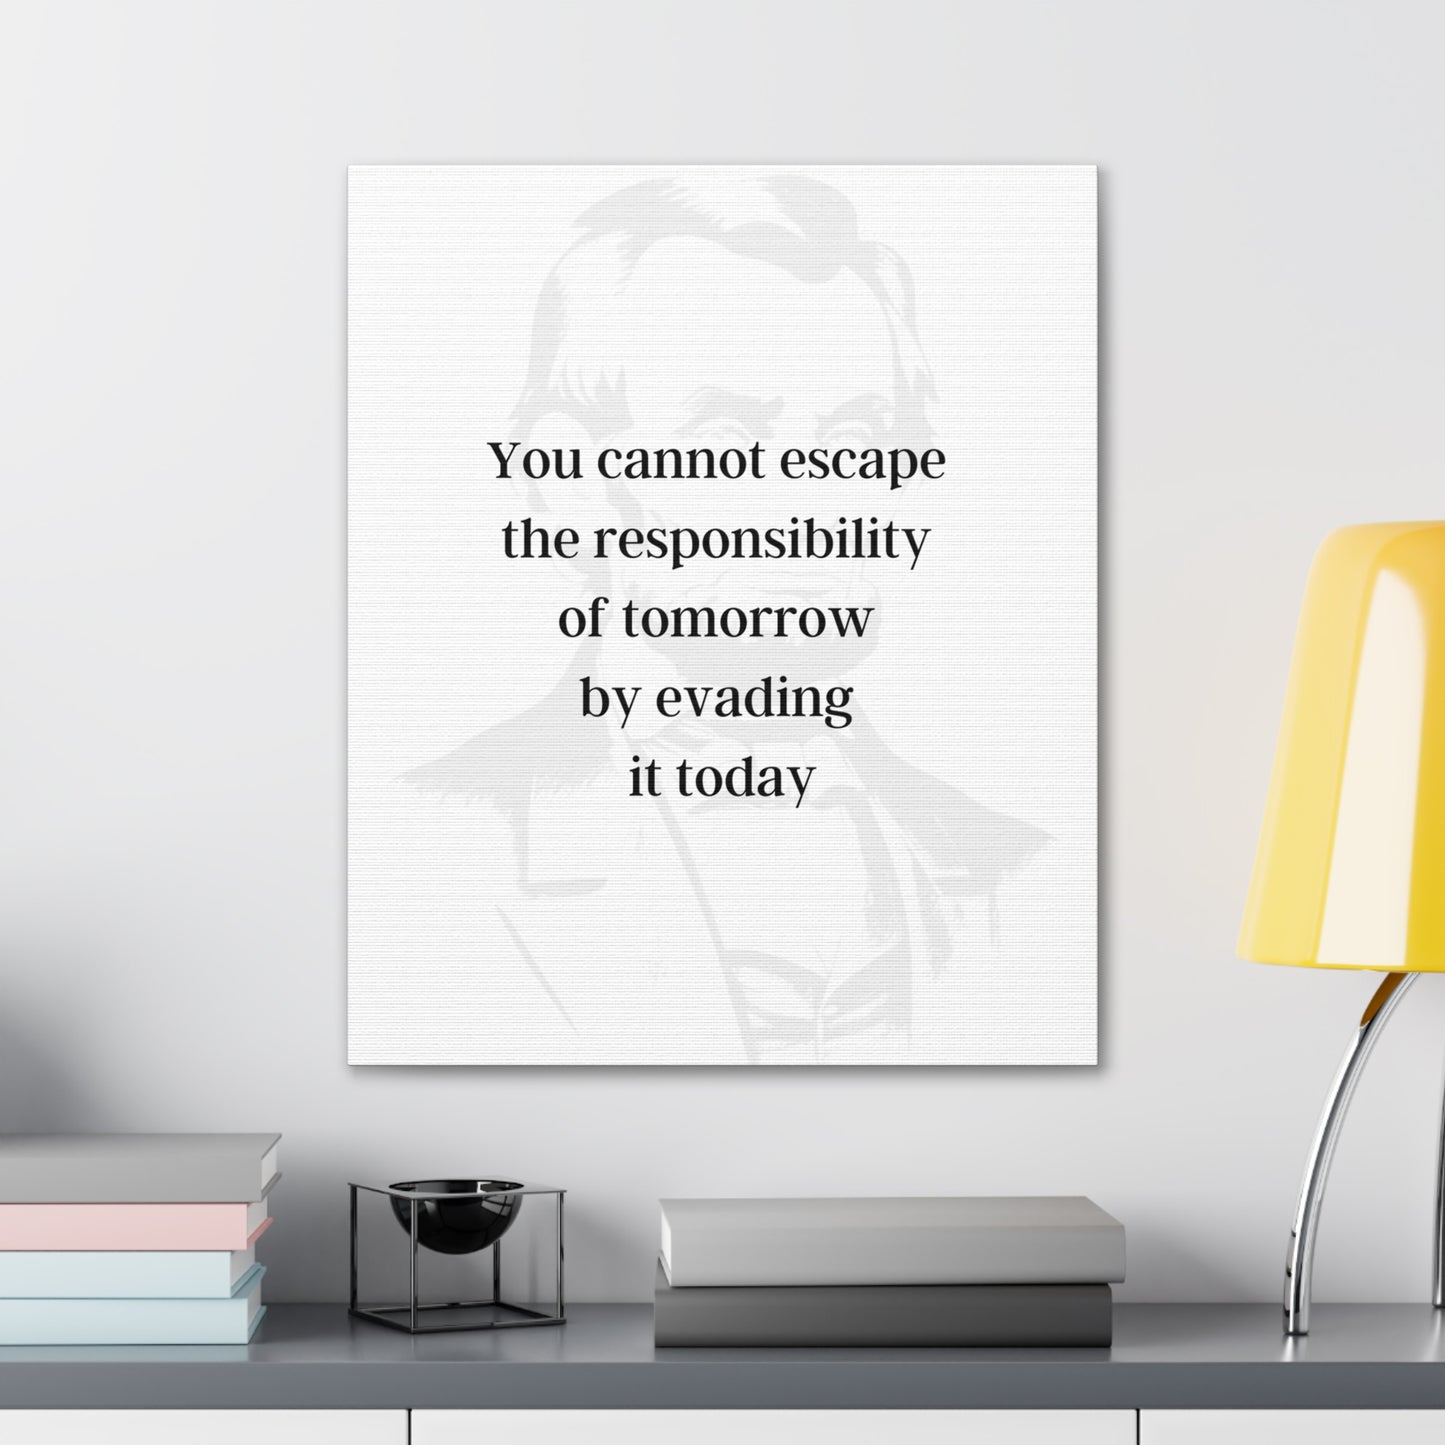 Abraham Lincoln Quote 1, Canvas Art, Light Print with Dark Lettering, 16th President of the United States, American Patriots, AI Art, Political Art, Canvas Prints, Presidential Portraits, Presidential Quotes, Inspirational Quotes